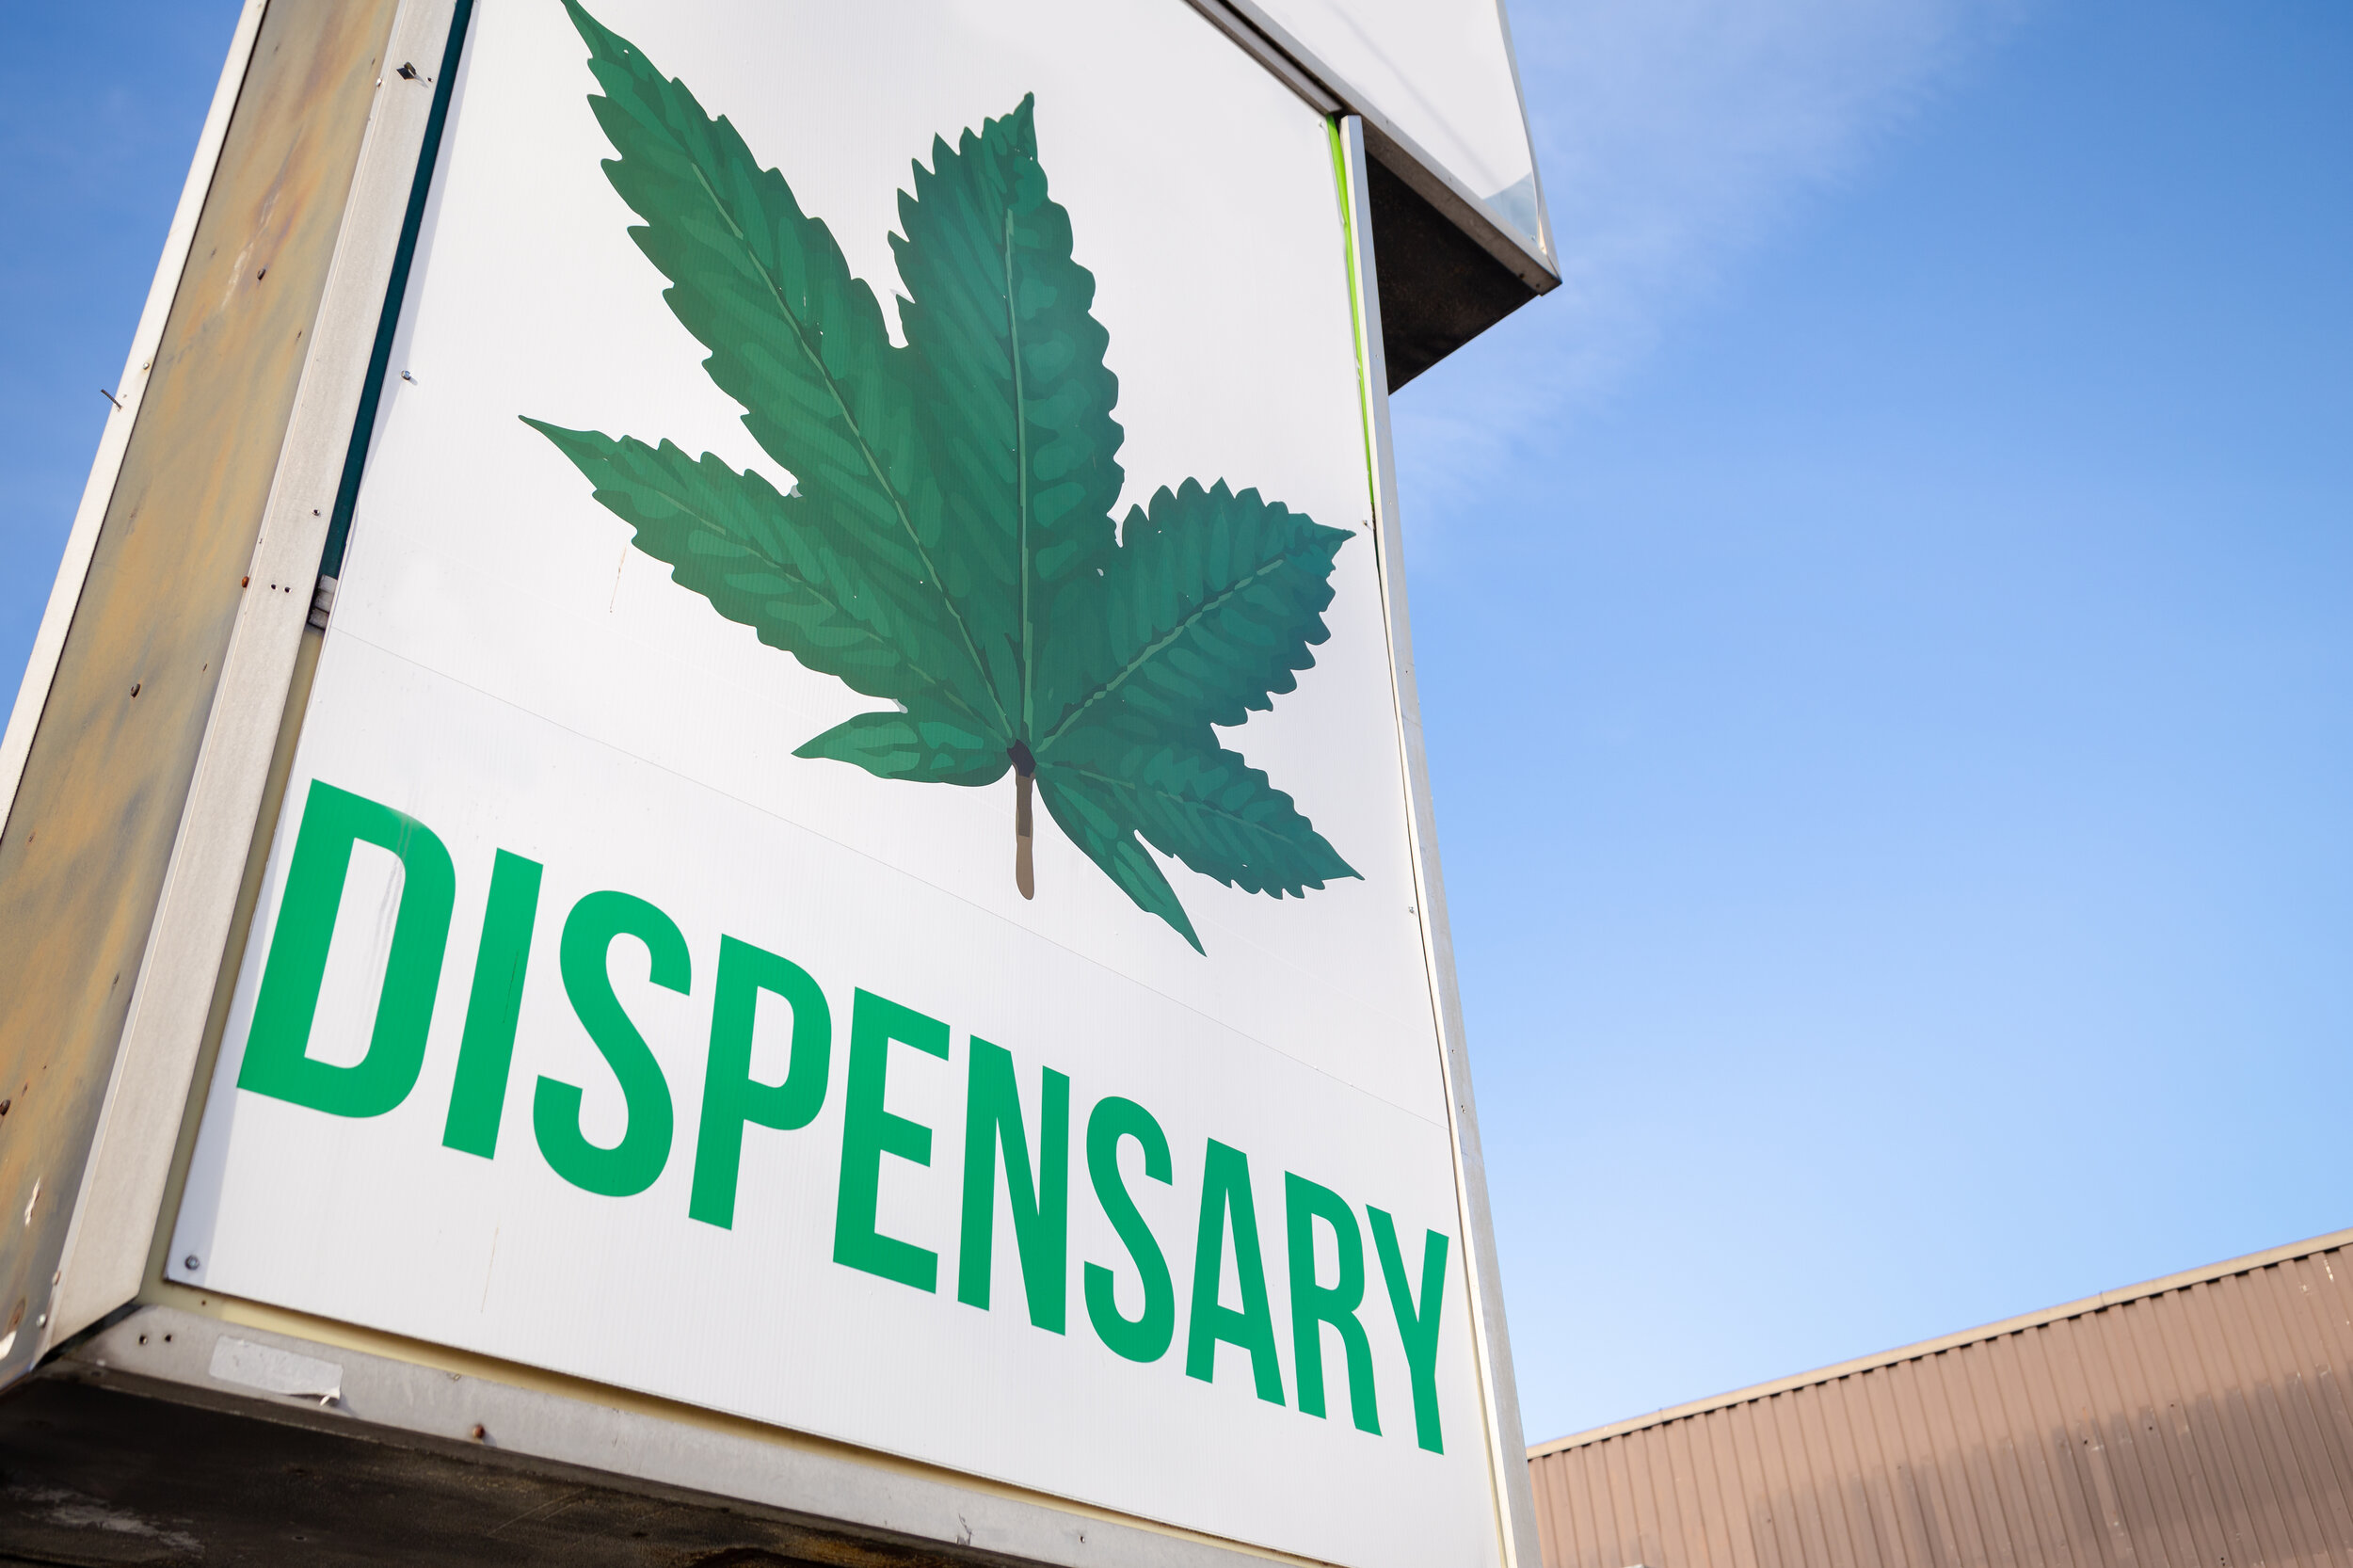 Maryland and D.C. Dispensaries Cannot Receive Federal Stimulus Funds